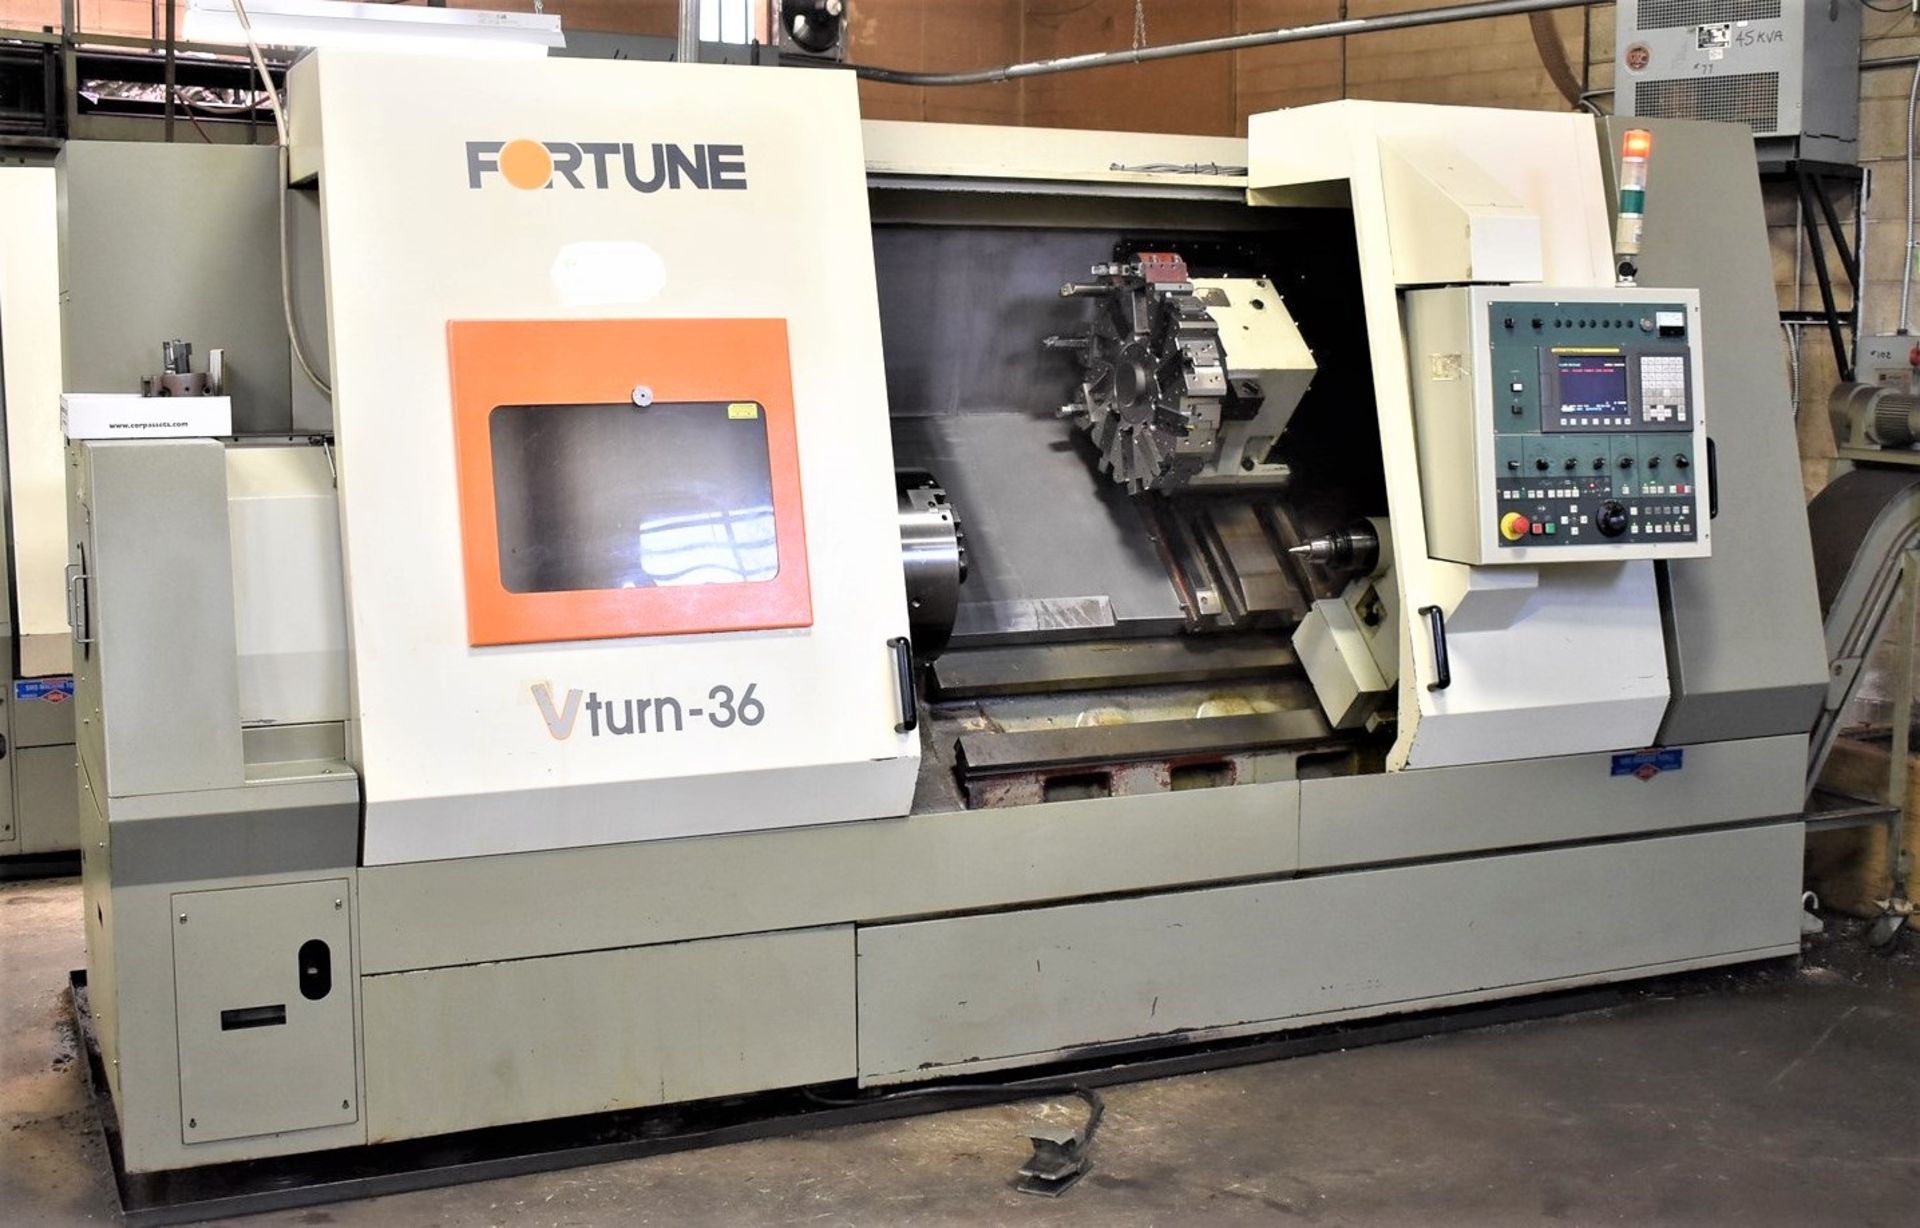 21.65"x35" Victor (Fortune) Model VTurn-36 2-Axis CNC Turning Center Lathe, S/N MD-1636, New 2007 - Image 10 of 10